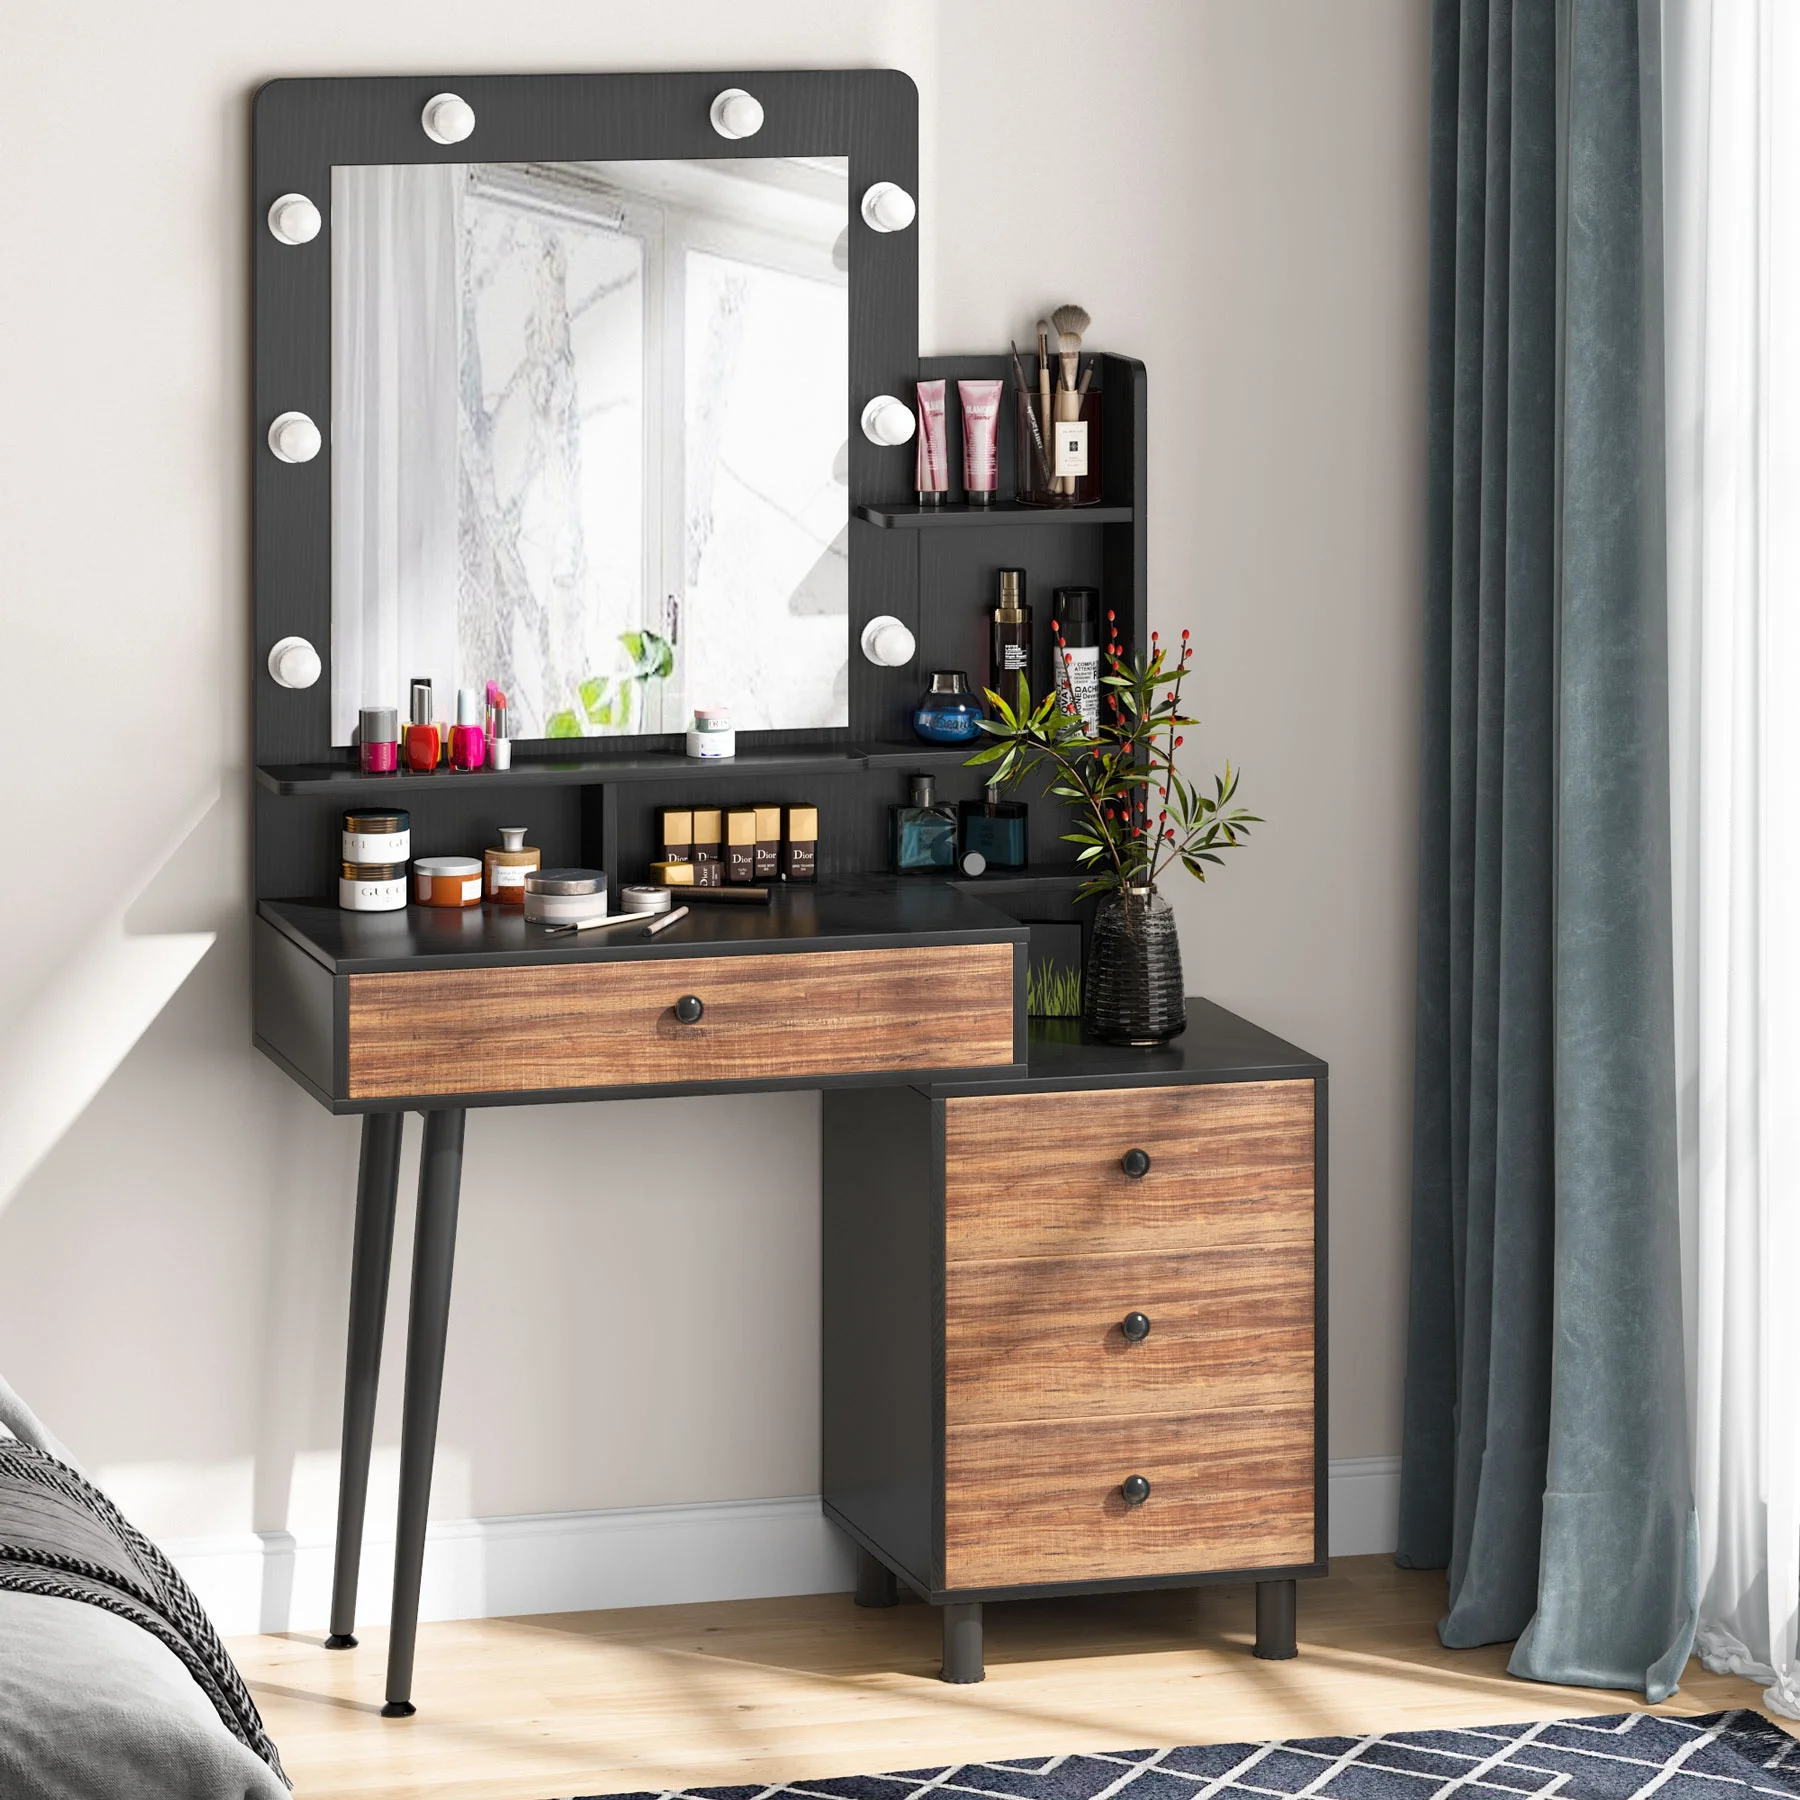 Tribesigns with Led Lights Mirror Vanity Desk, Makeup Dressing Table with Drawers, Dresser Table for Makeup Vanity Desk